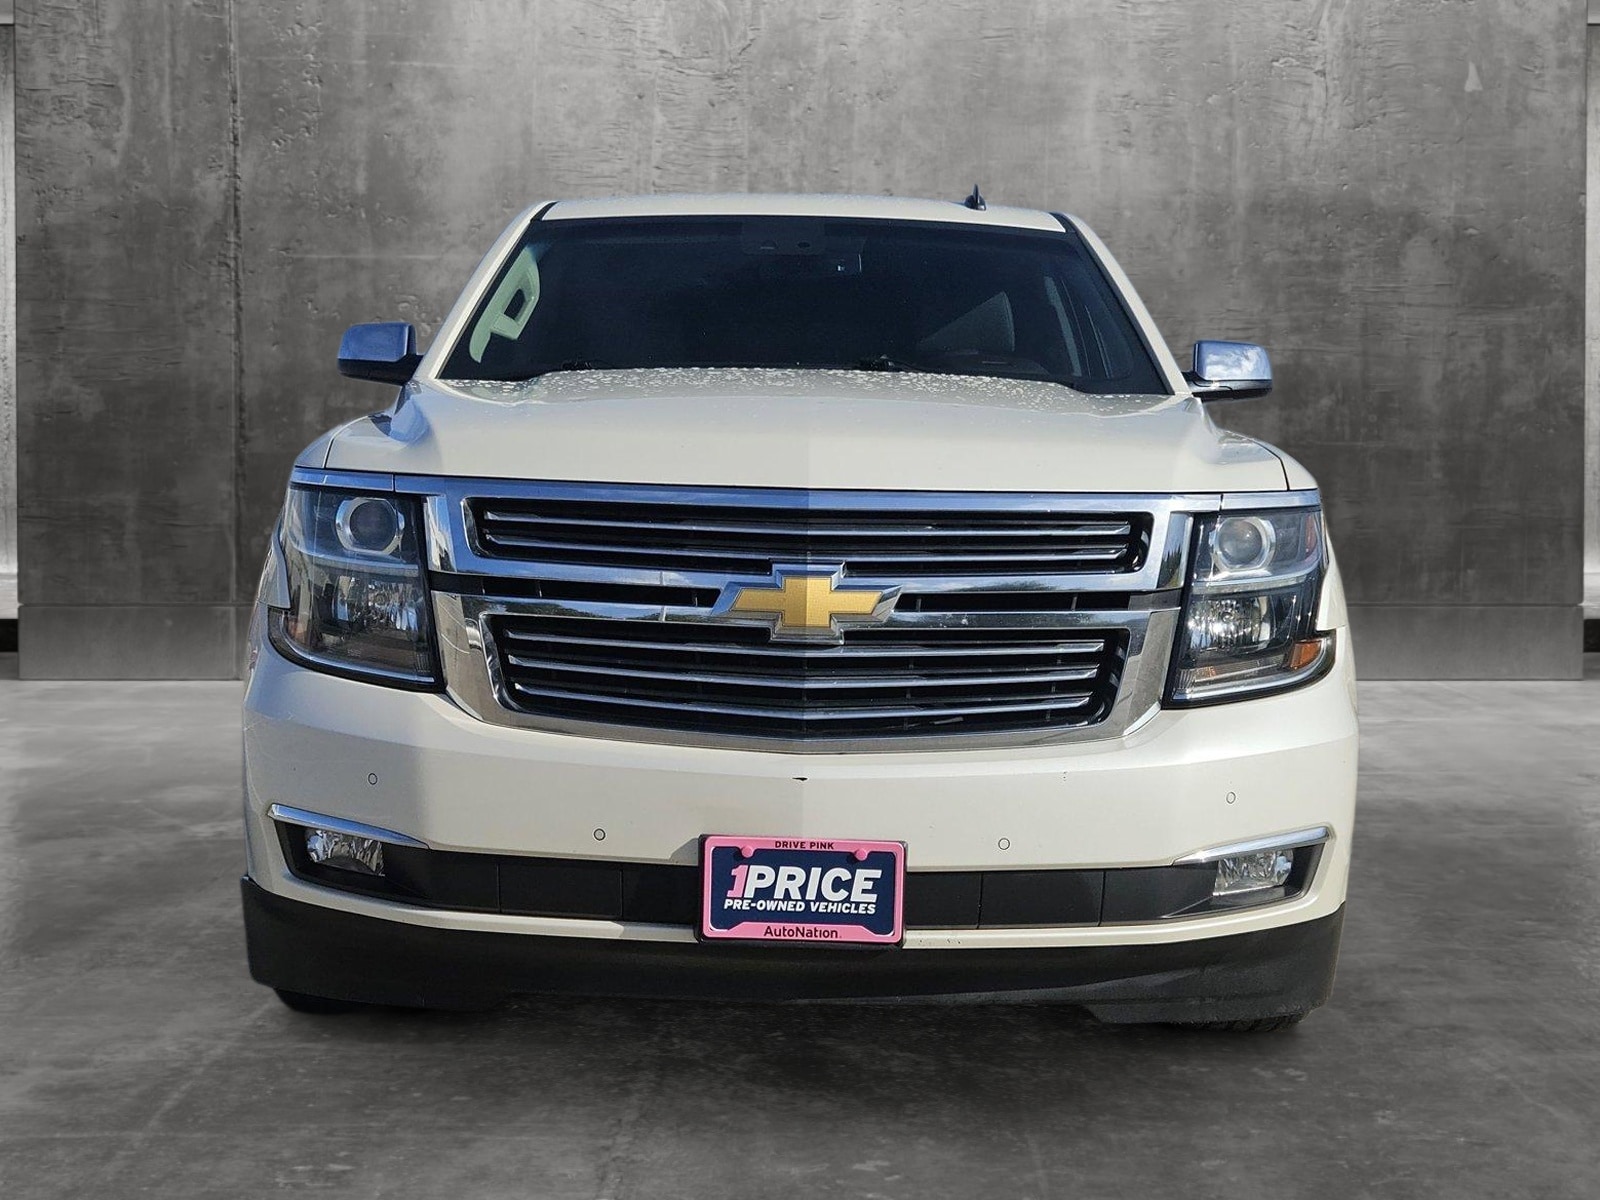 Used 2015 Chevrolet Tahoe LTZ with VIN 1GNSCCKCXFR111885 for sale in Corpus Christi, TX